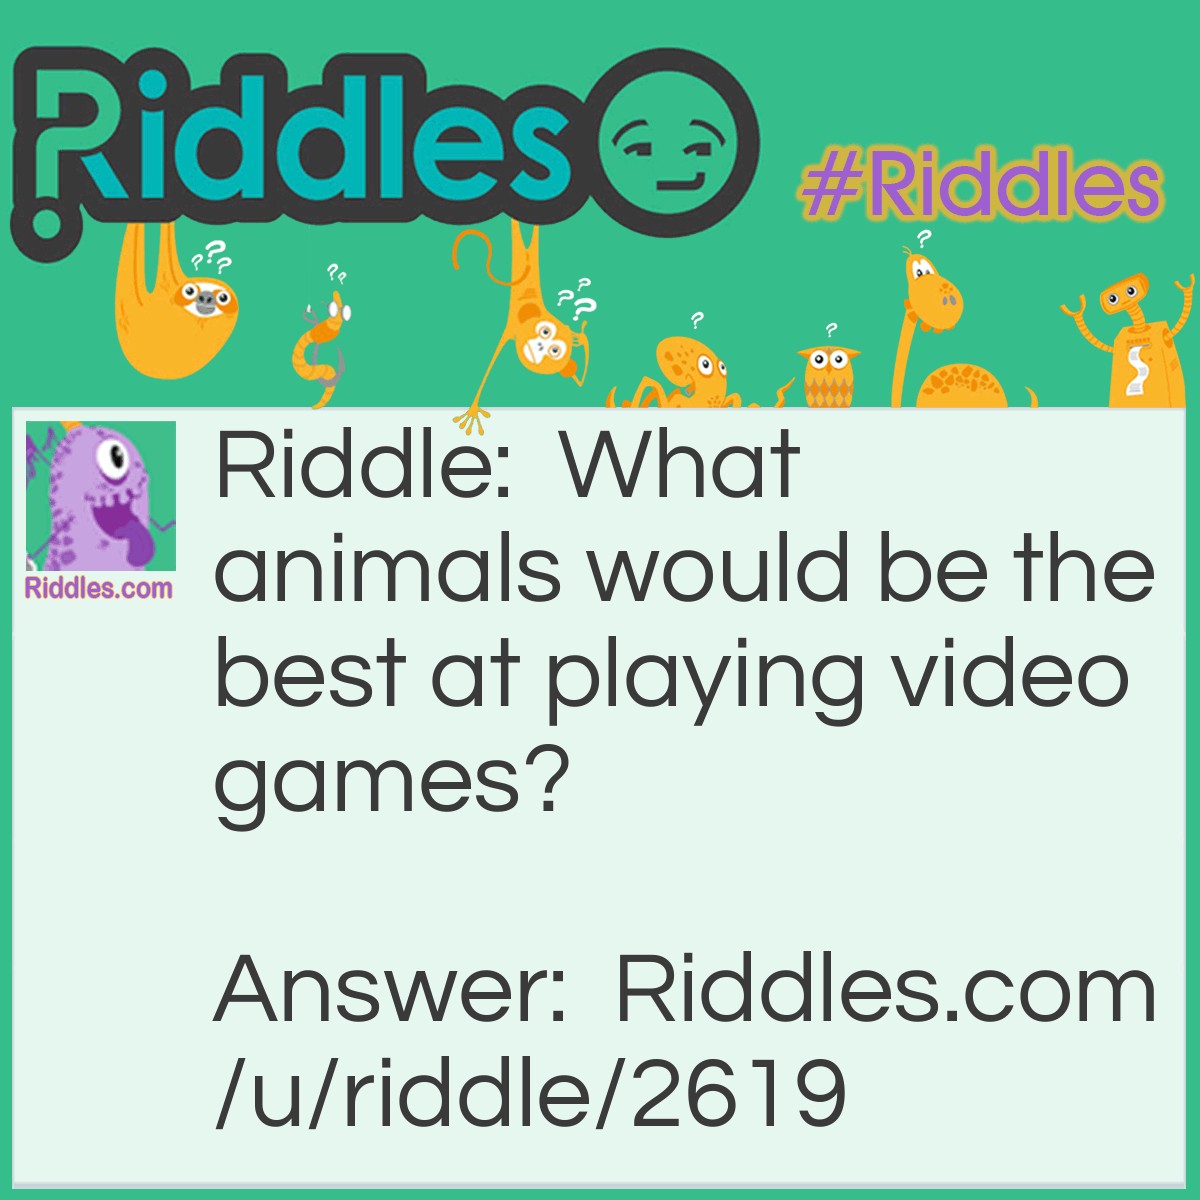 Riddle: What animals would be the best at playing video games? Answer: An octopus.